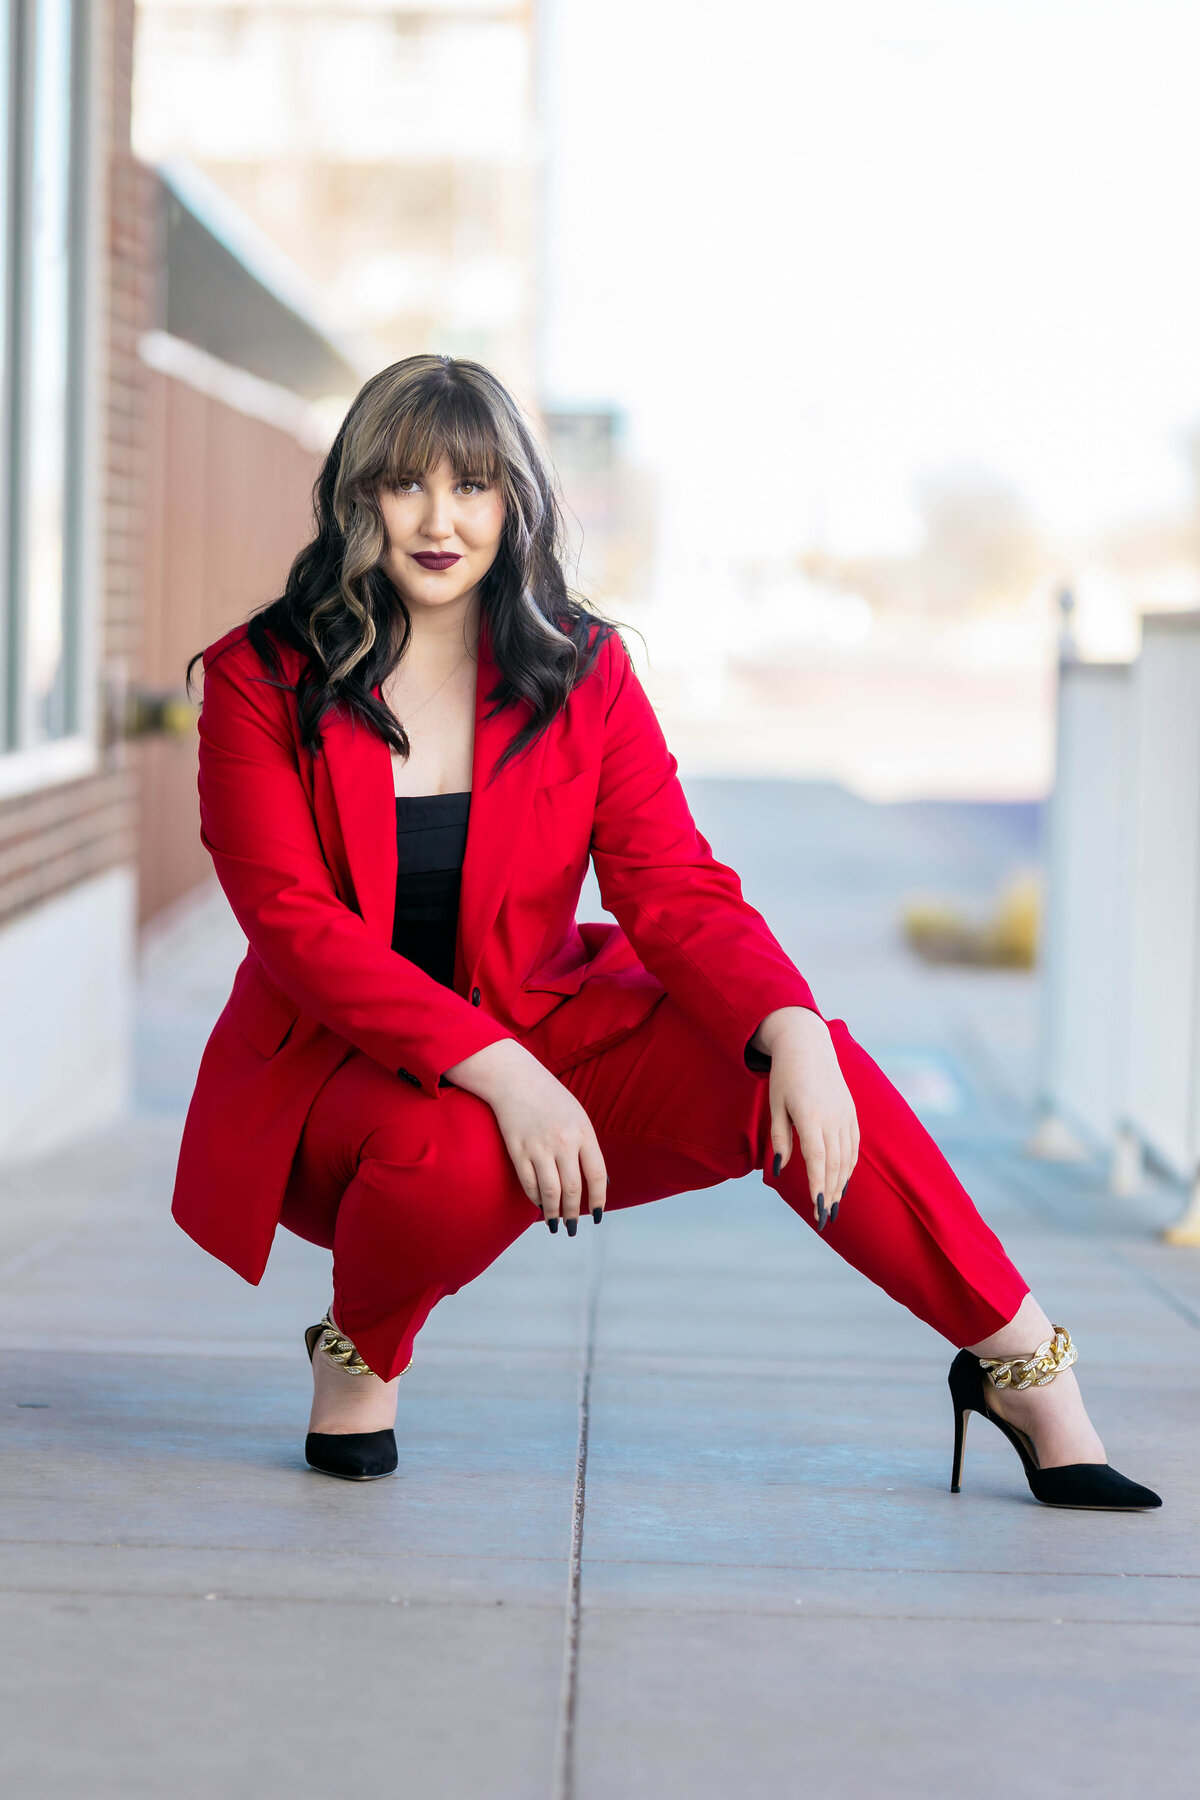 high school senior girl photo session.  girl is wearing a red pantsuit with a black top and black heals looking at the camera